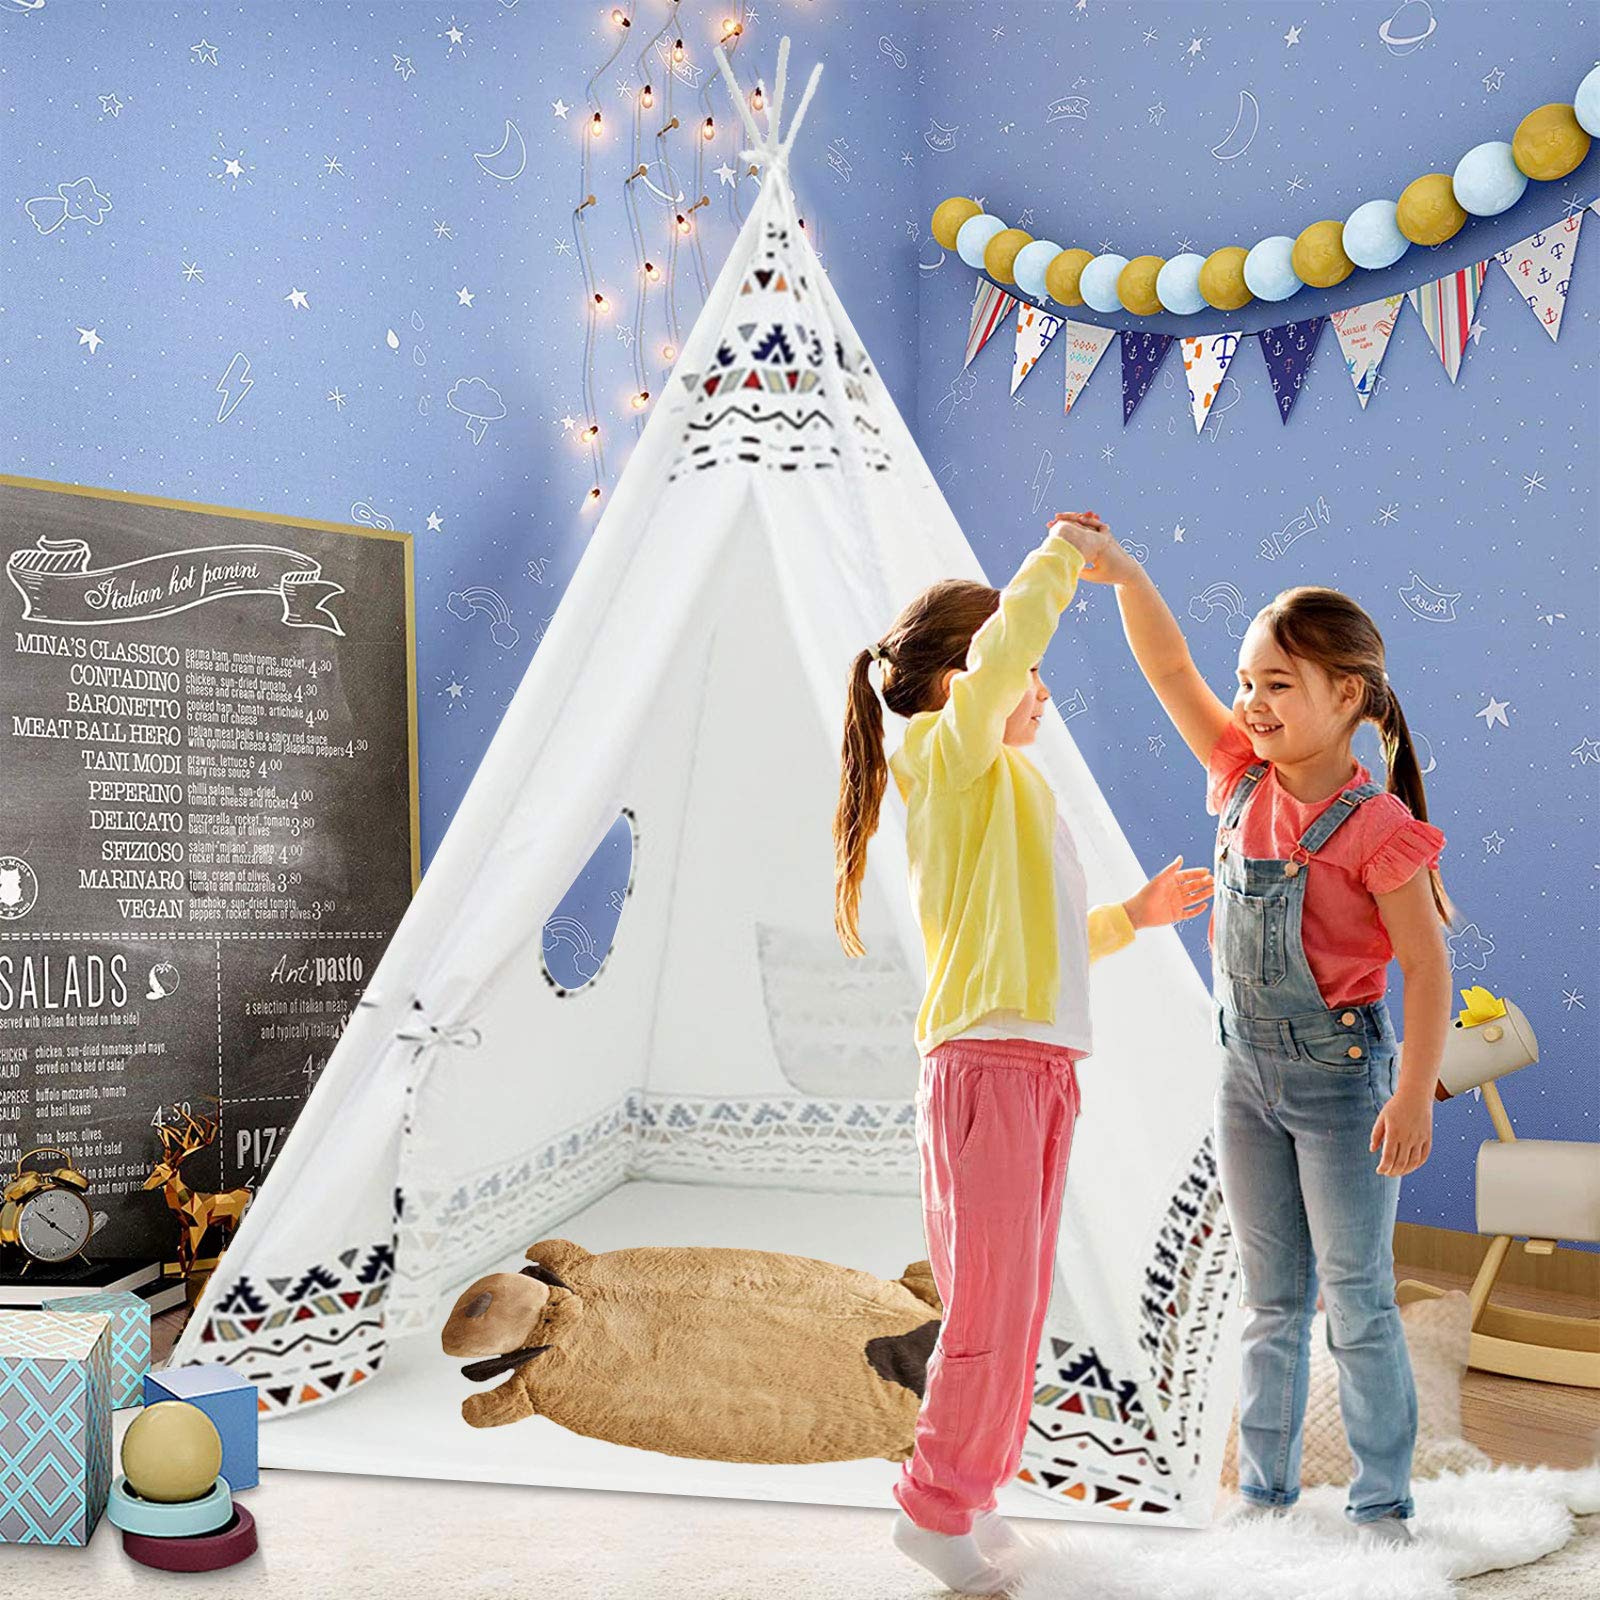 Wholesale Discount Child Enclosure Playpen - Arkmiido Teepee Tent for Kids Raw White Canvas Teepee with Windows Carry Case Foldable Children Play Tents Playhouse Toys for Baby Toddler Girls/Boys I...